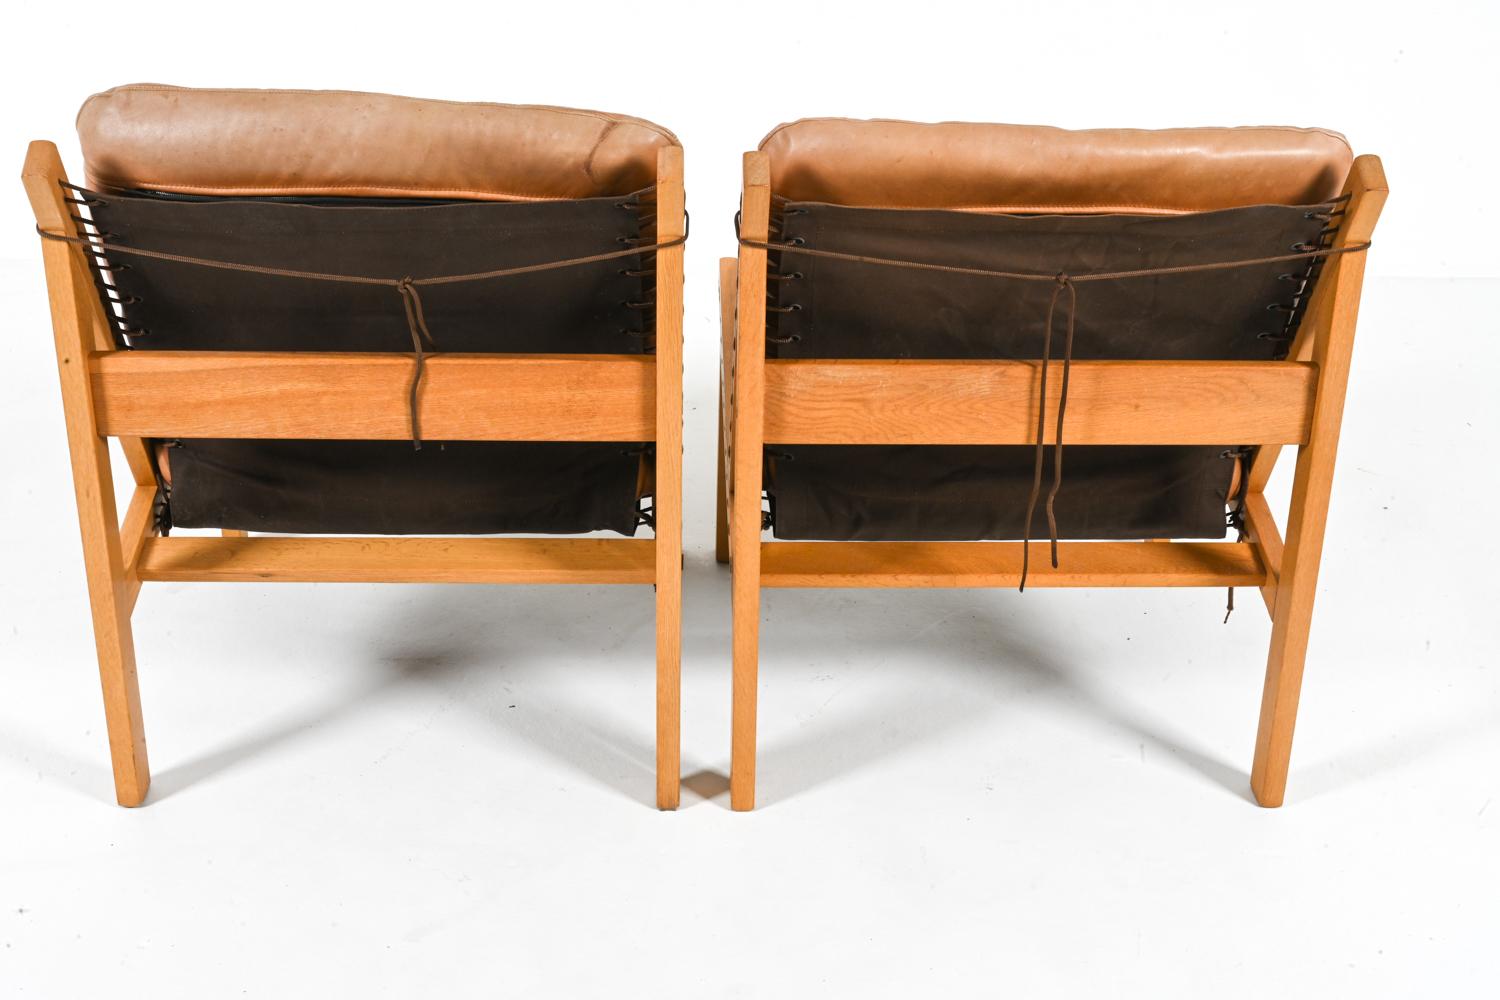 Leather Pair of Oak 'Hunter' Lounge Chairs by Torbjørn Afdal for Bruksbo, Norway, 1960's For Sale